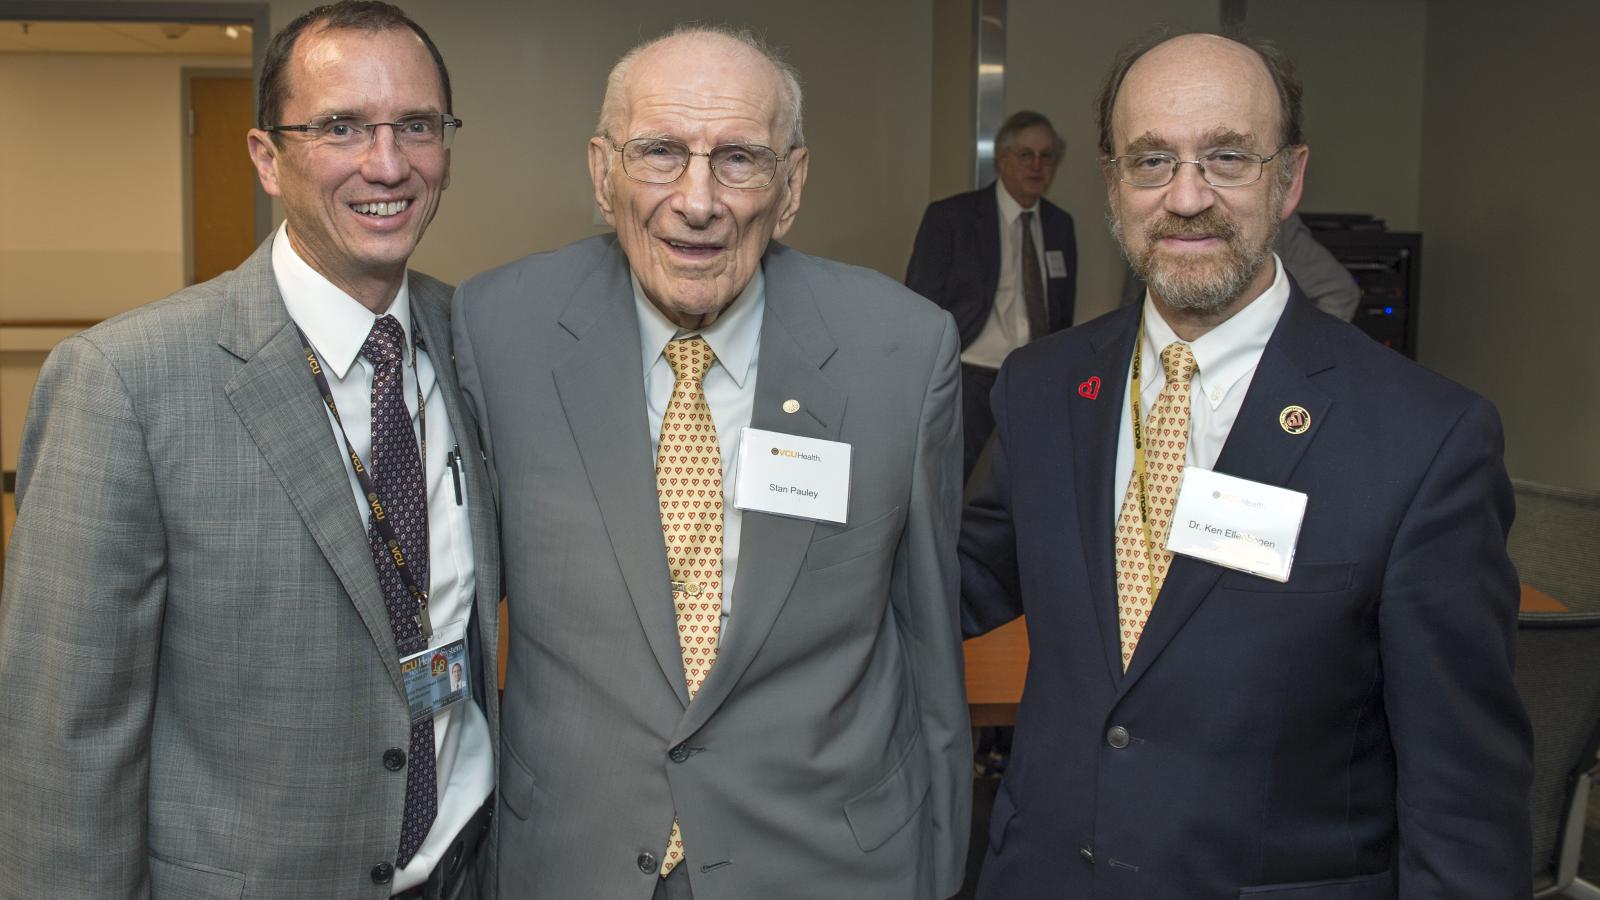 William Hundley, M.D., director of the Pauley Heart Center, spends time with Stan Pauley and Ken Ellenbogen, M.D., chair of the Division of Cardiology, after the ribbon cutting at VCU Health’s new Cardiac Imaging Suite. Photo: Kevin Morley, VCU University Marketing